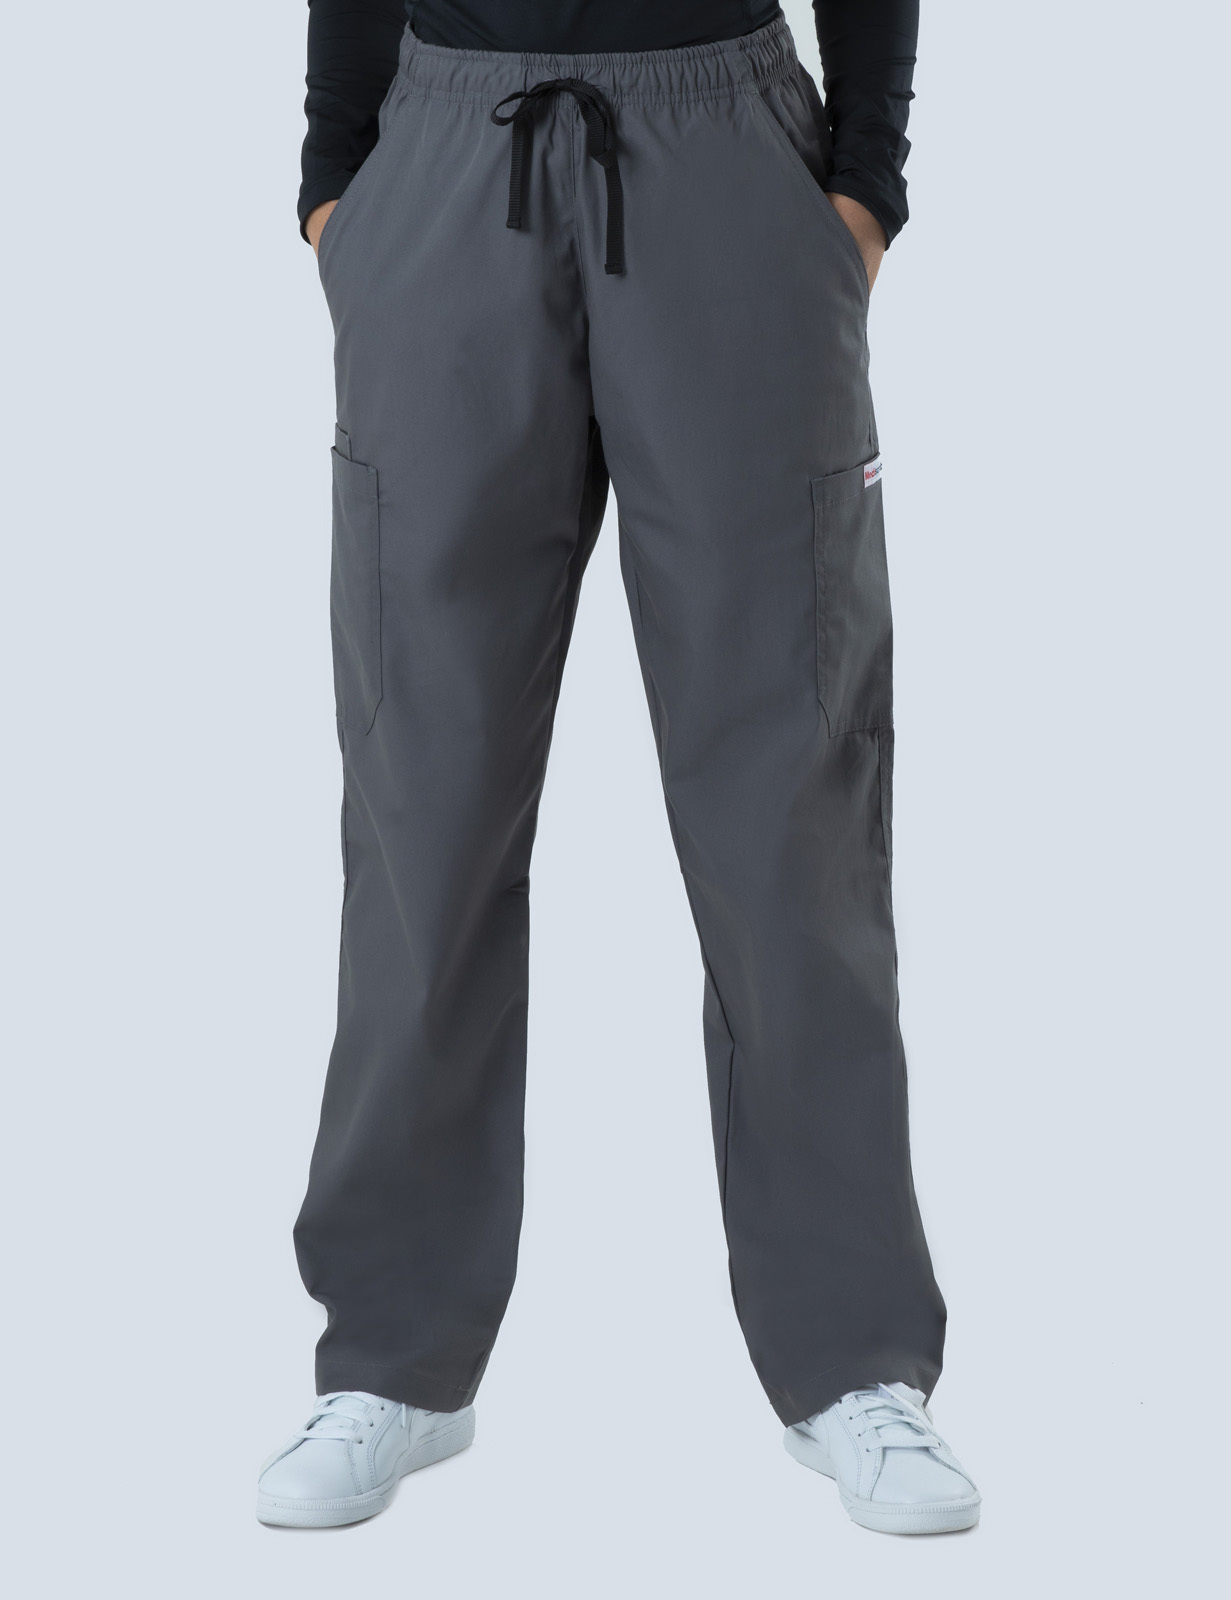 SCPU Hospital - RN Emergency (Women's Fit Solid Scrub Top and Cargo Pants in Steel Grey incl Logos)